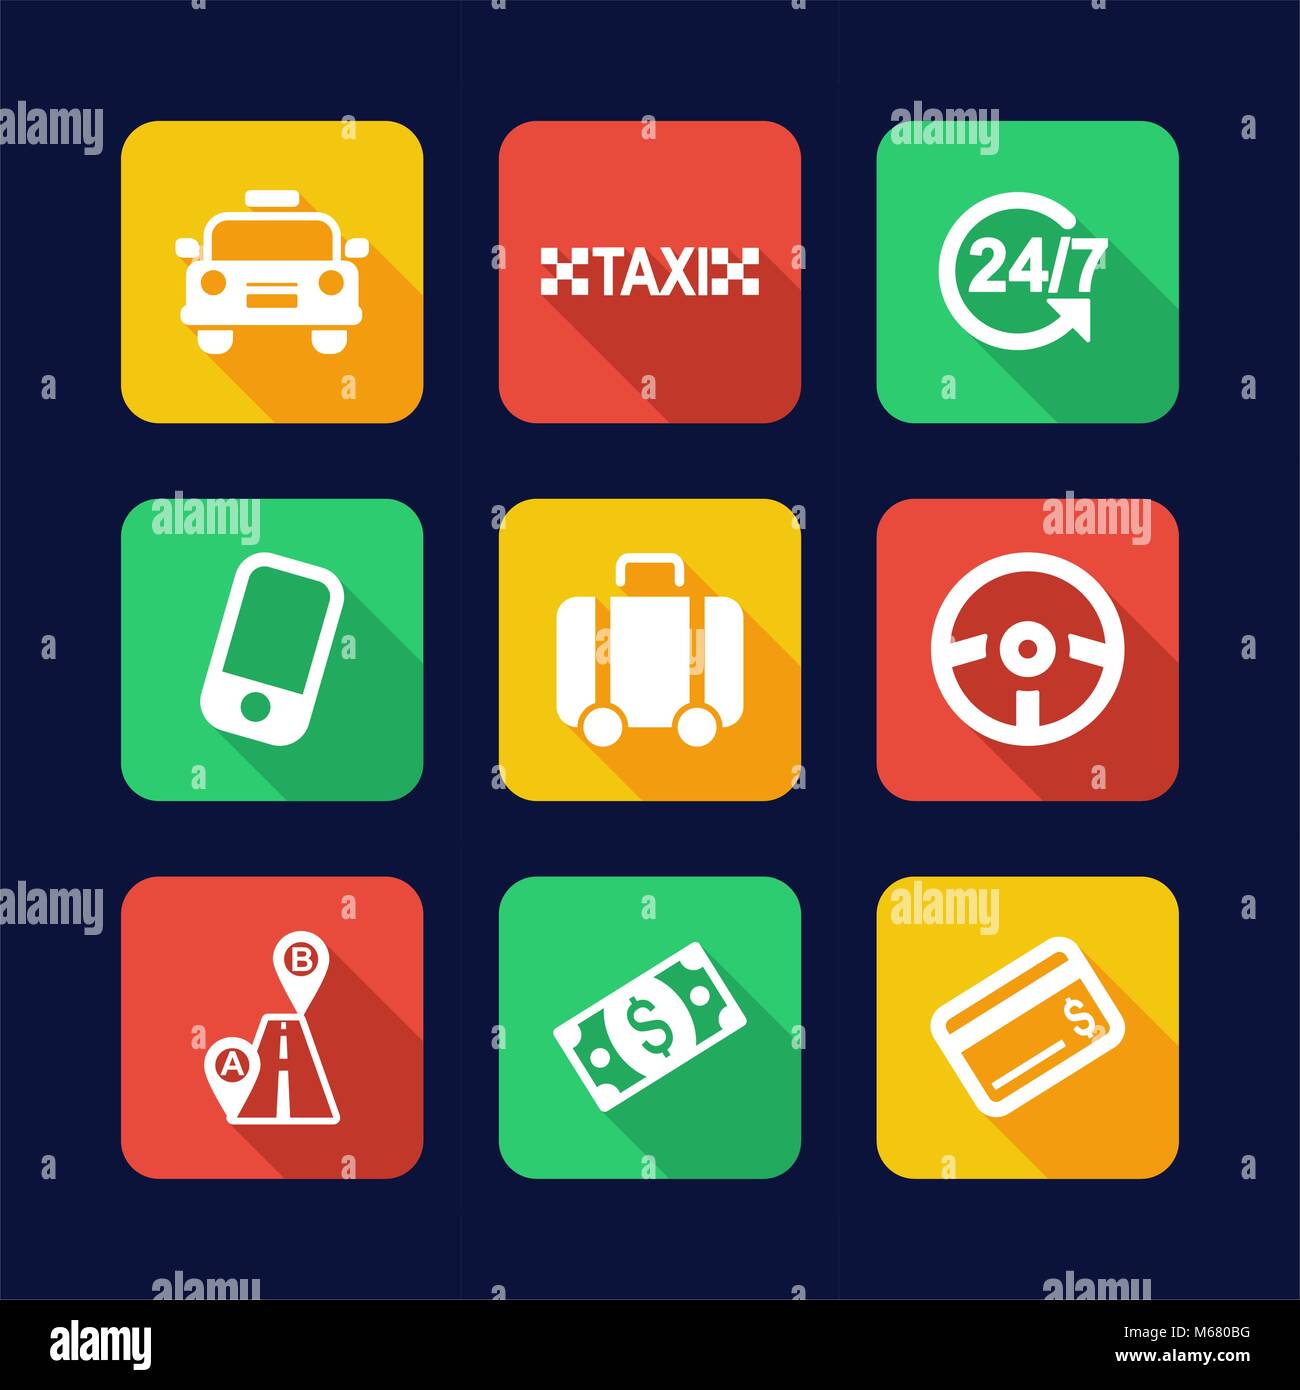 Taxi Icons Flat Design Stock Vector